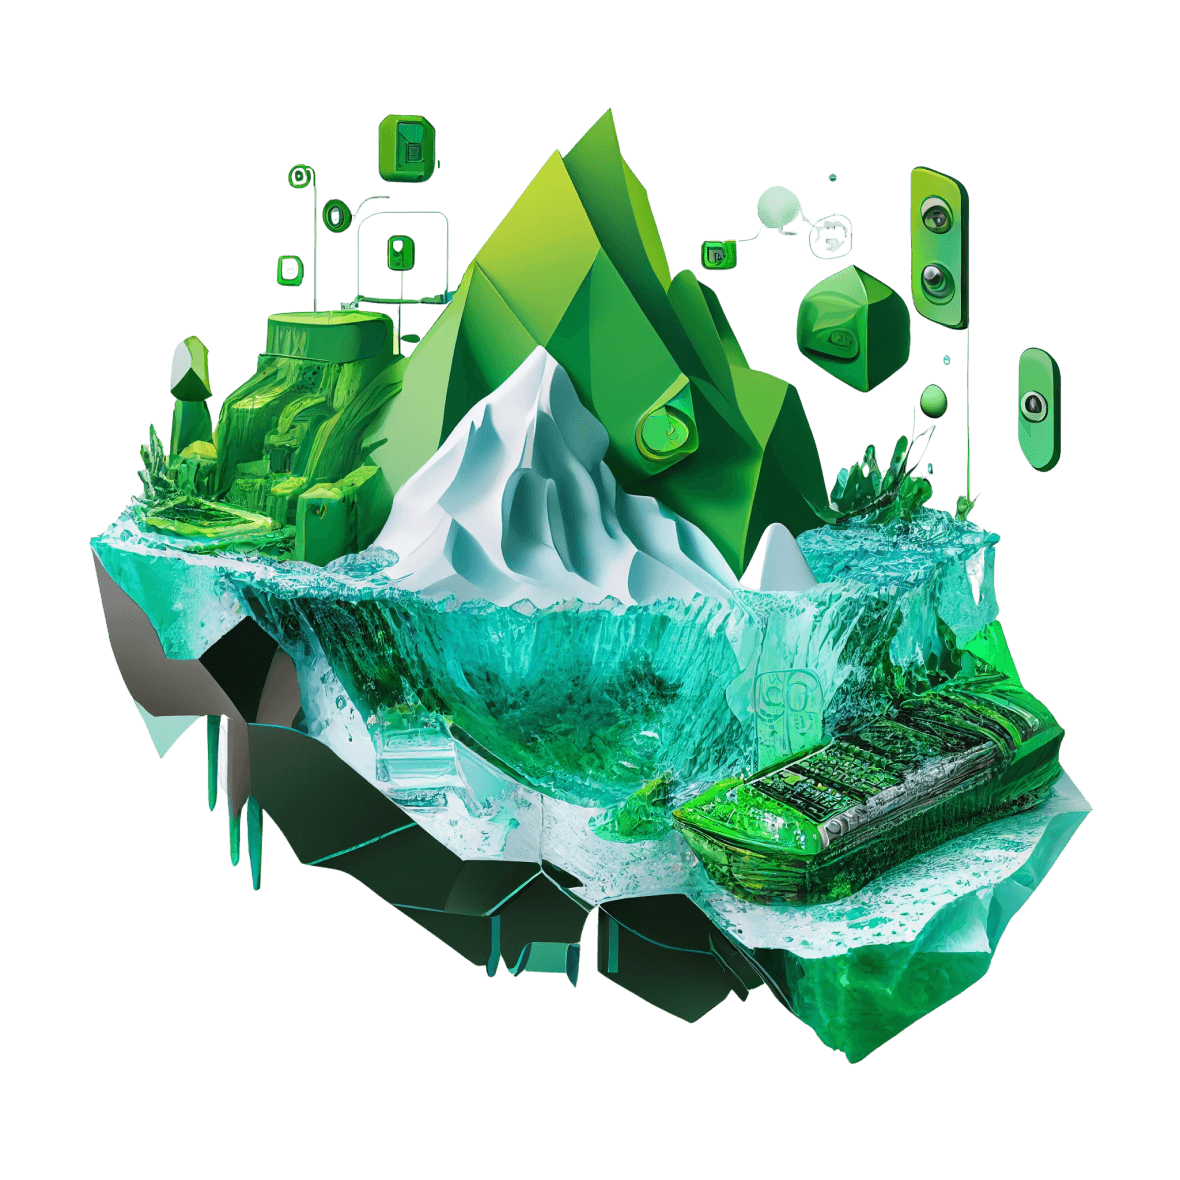 Abstract illustration of a green and blue iceberg made of electronic components